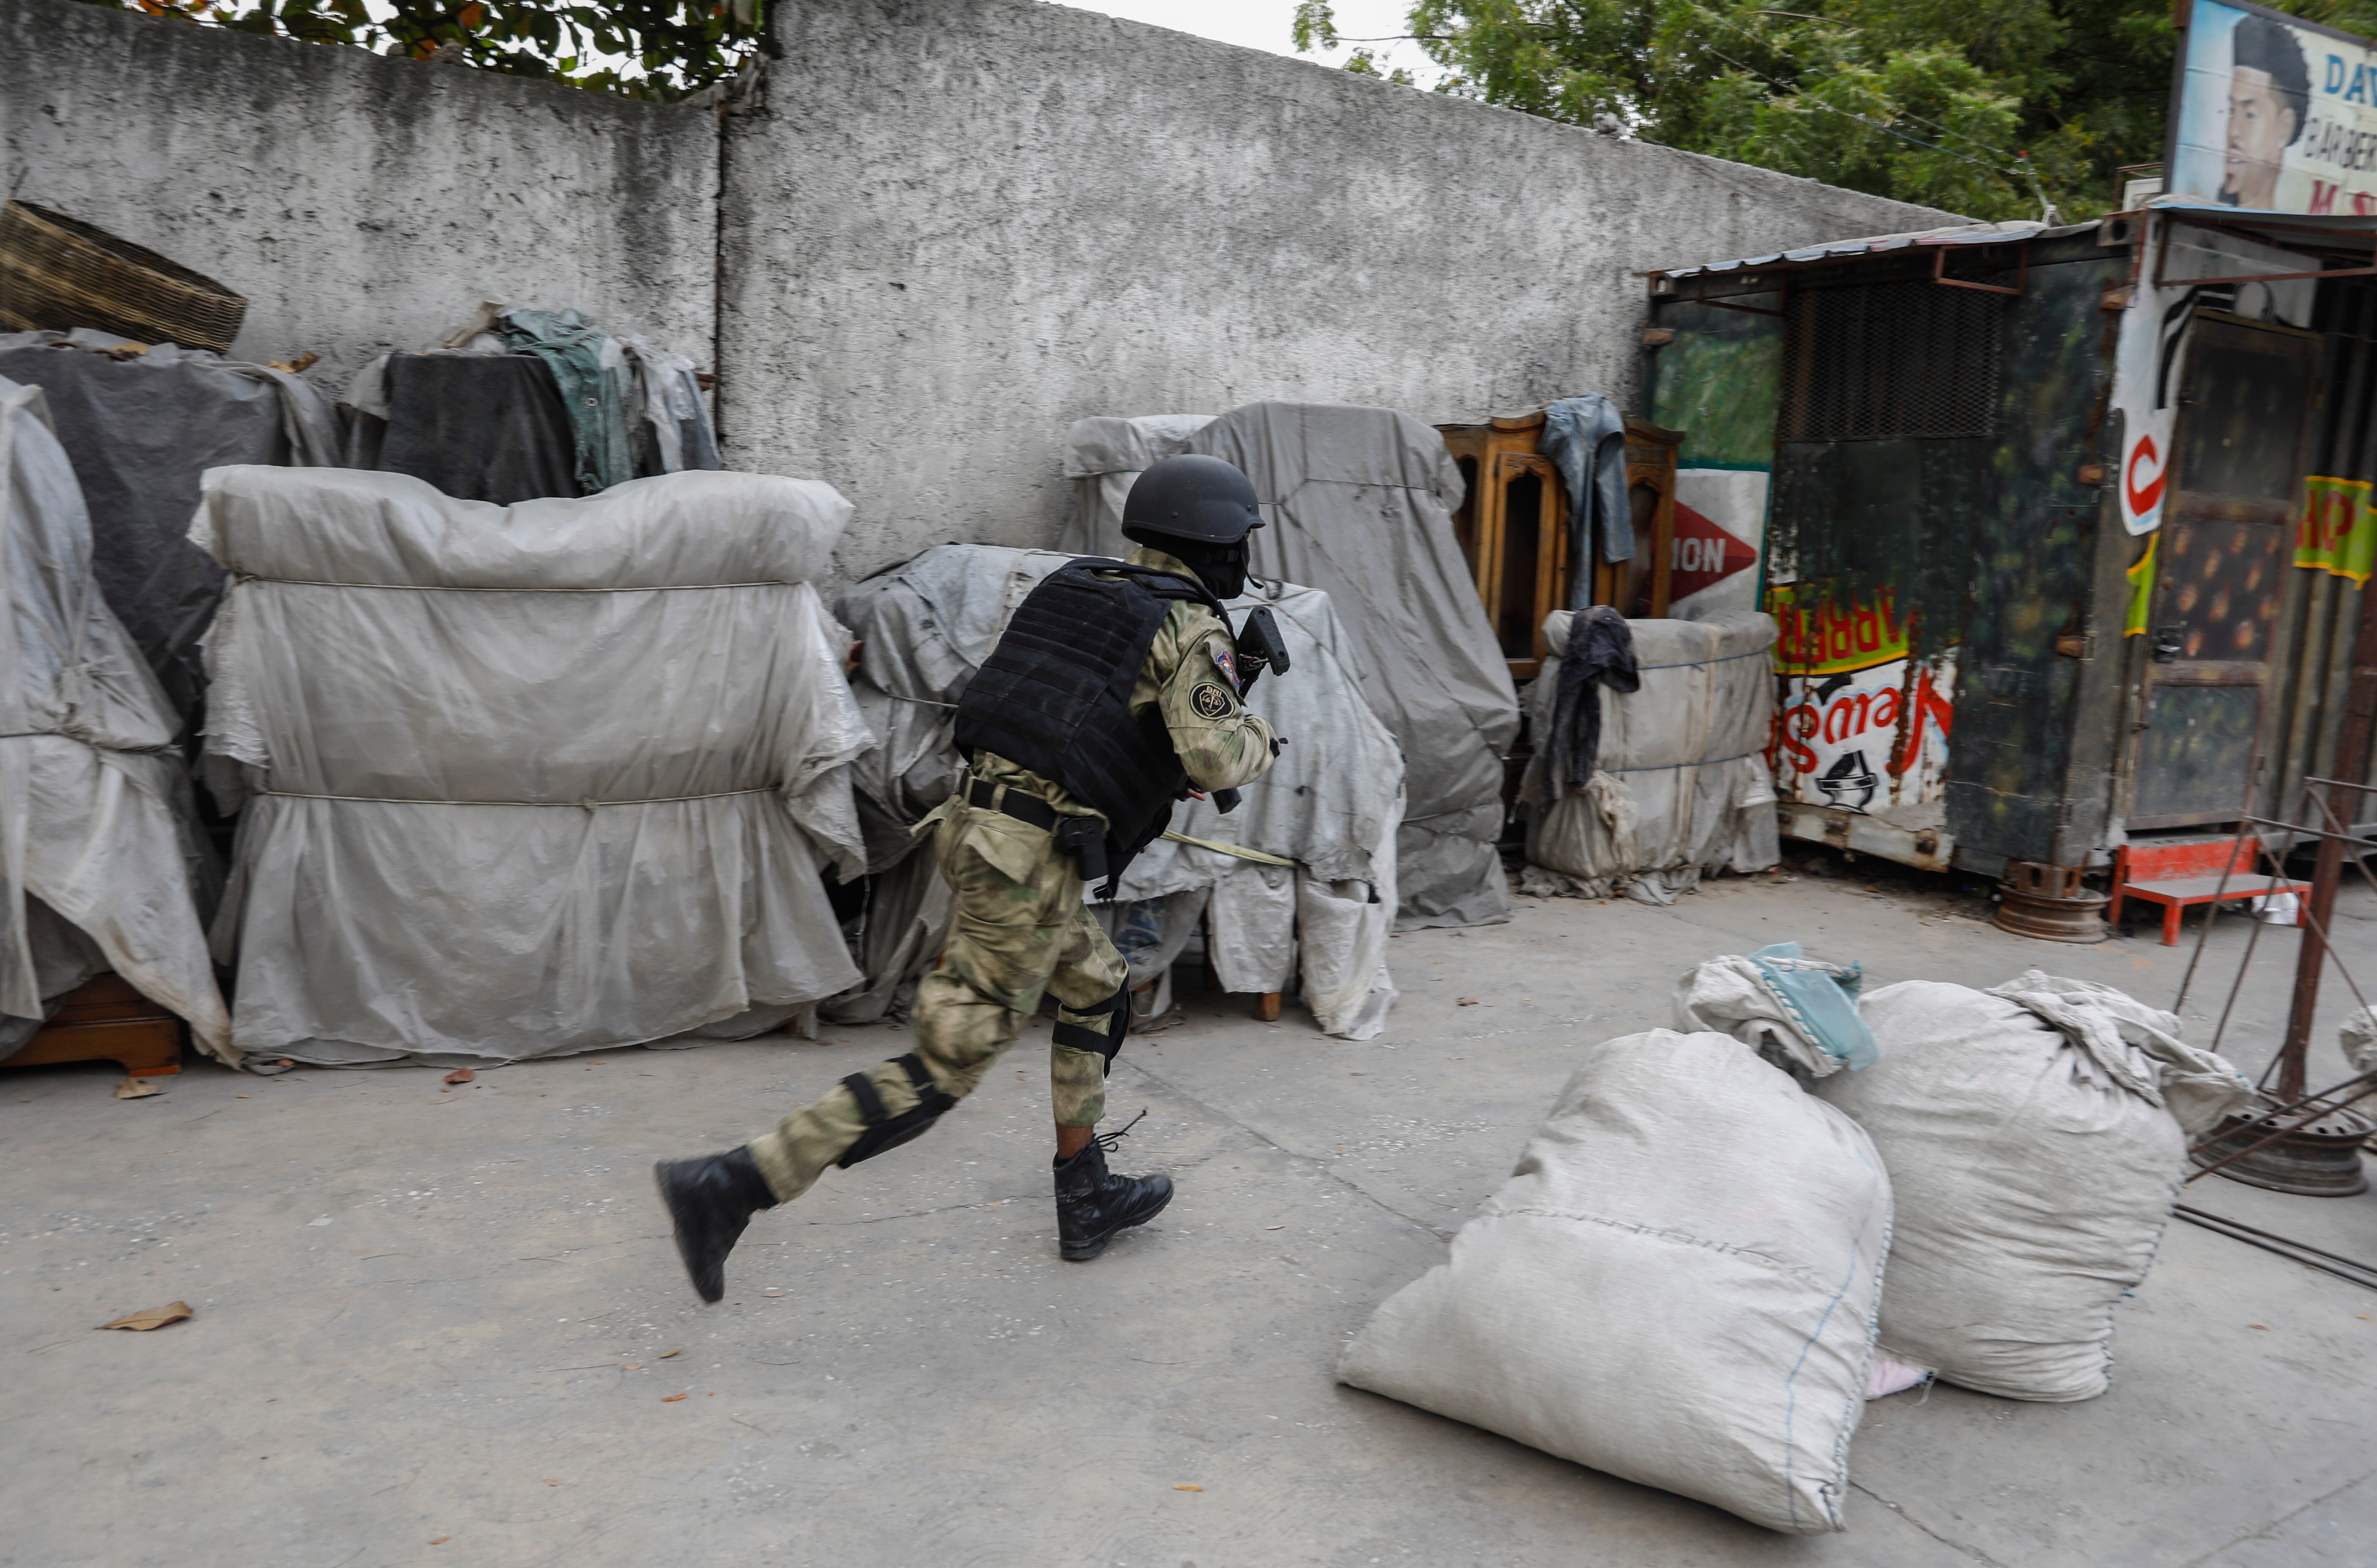 A police officer takes part in an anti-gang operation in the Portail neighbourhood of Port-au-Prince